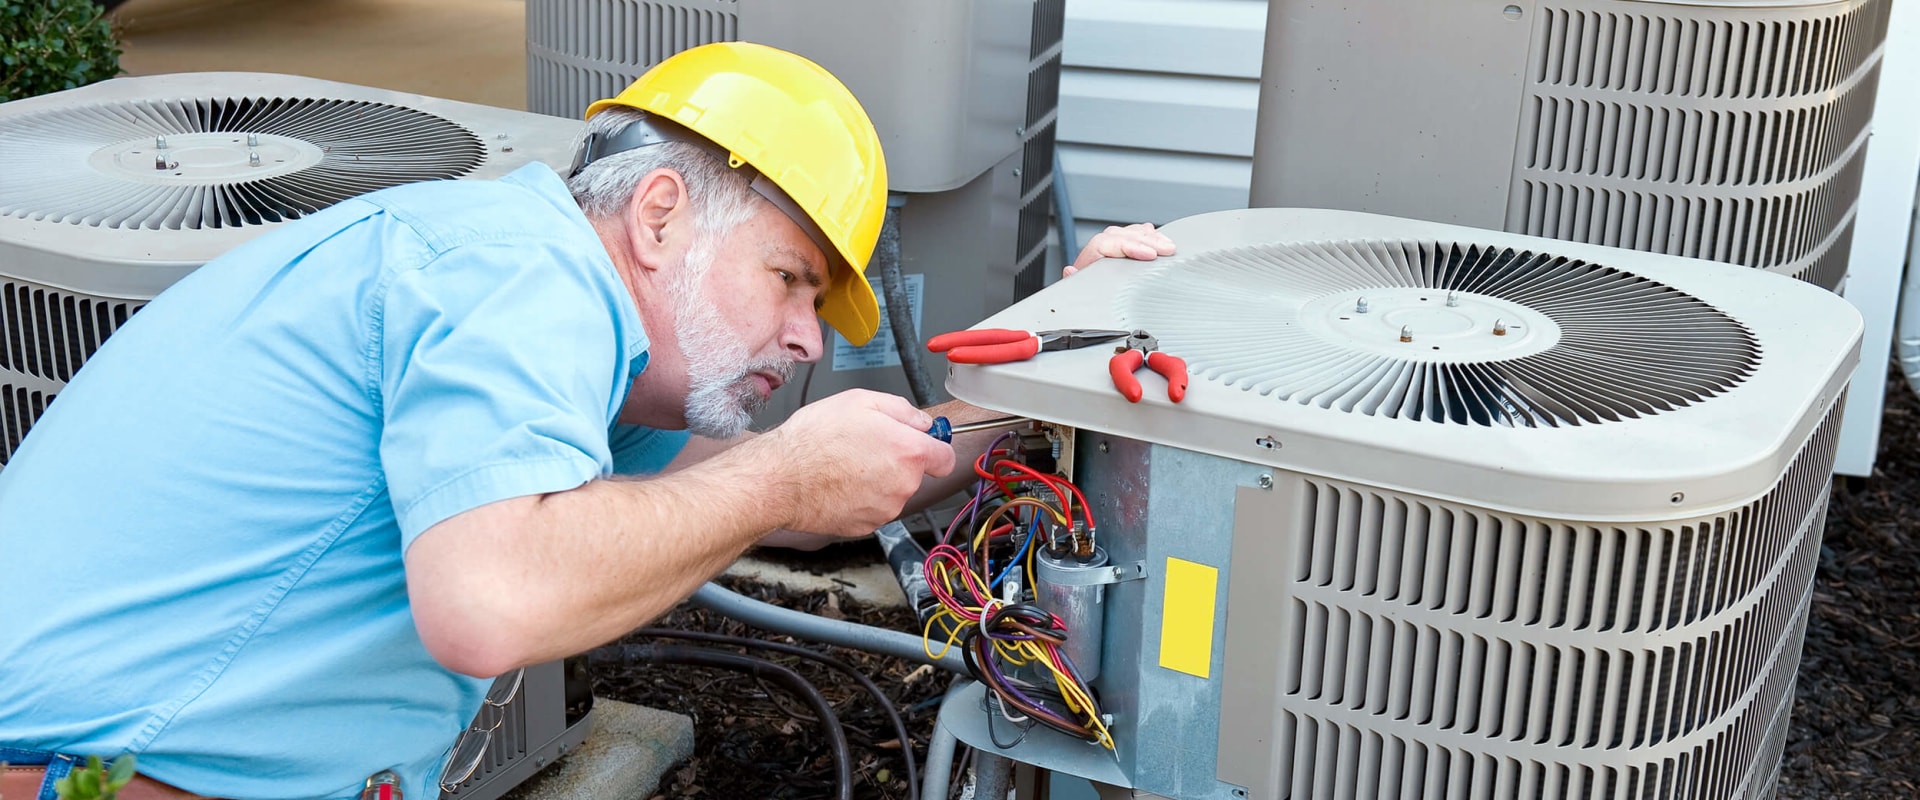 Secure Payment Options for HVAC Maintenance in Boca Raton, FL